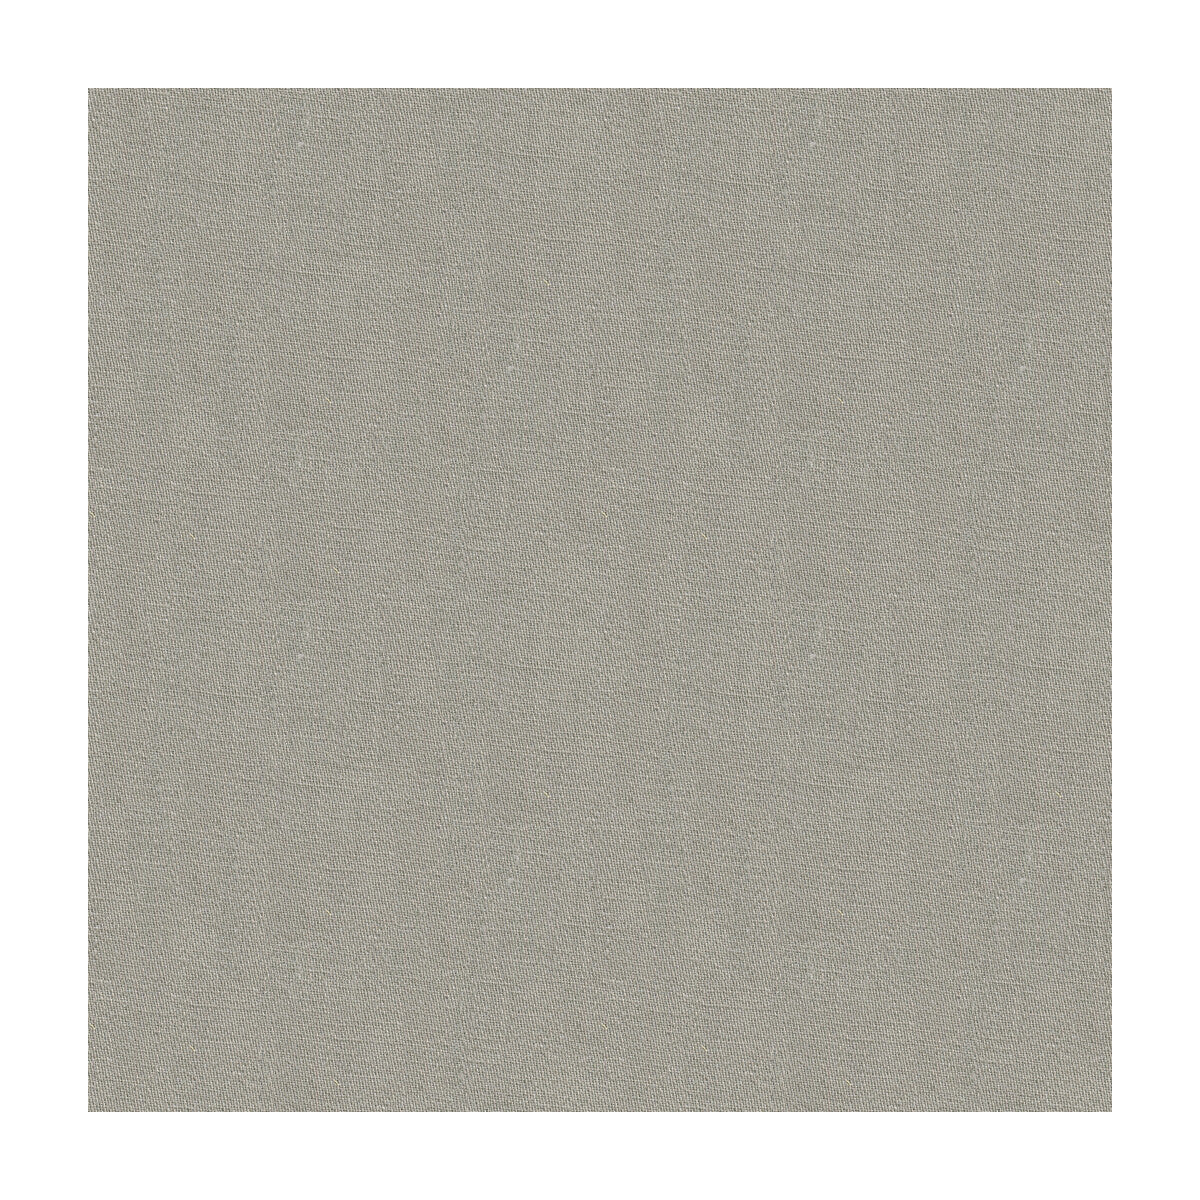 Otes Solid fabric in pebble color - pattern 8015167.21.0 - by Brunschwig &amp; Fils in the L&